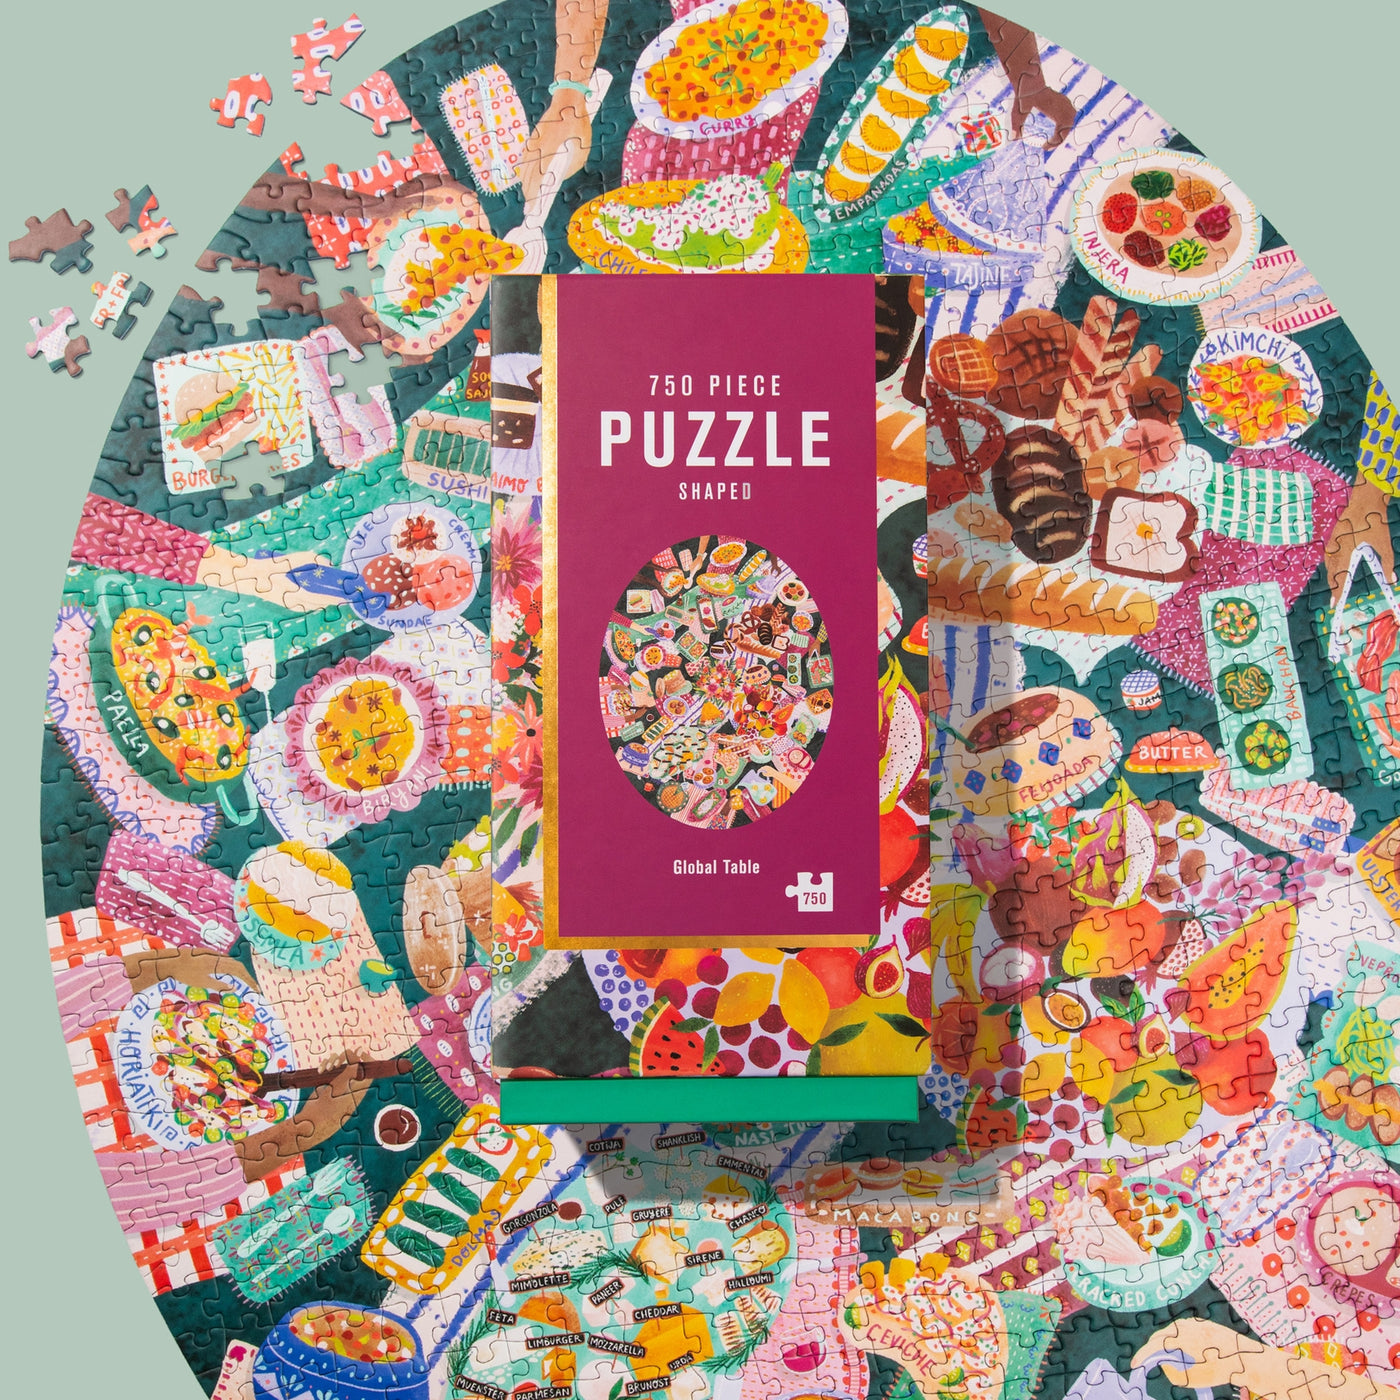 Global Table | 750 Piece Jigsaw Puzzle